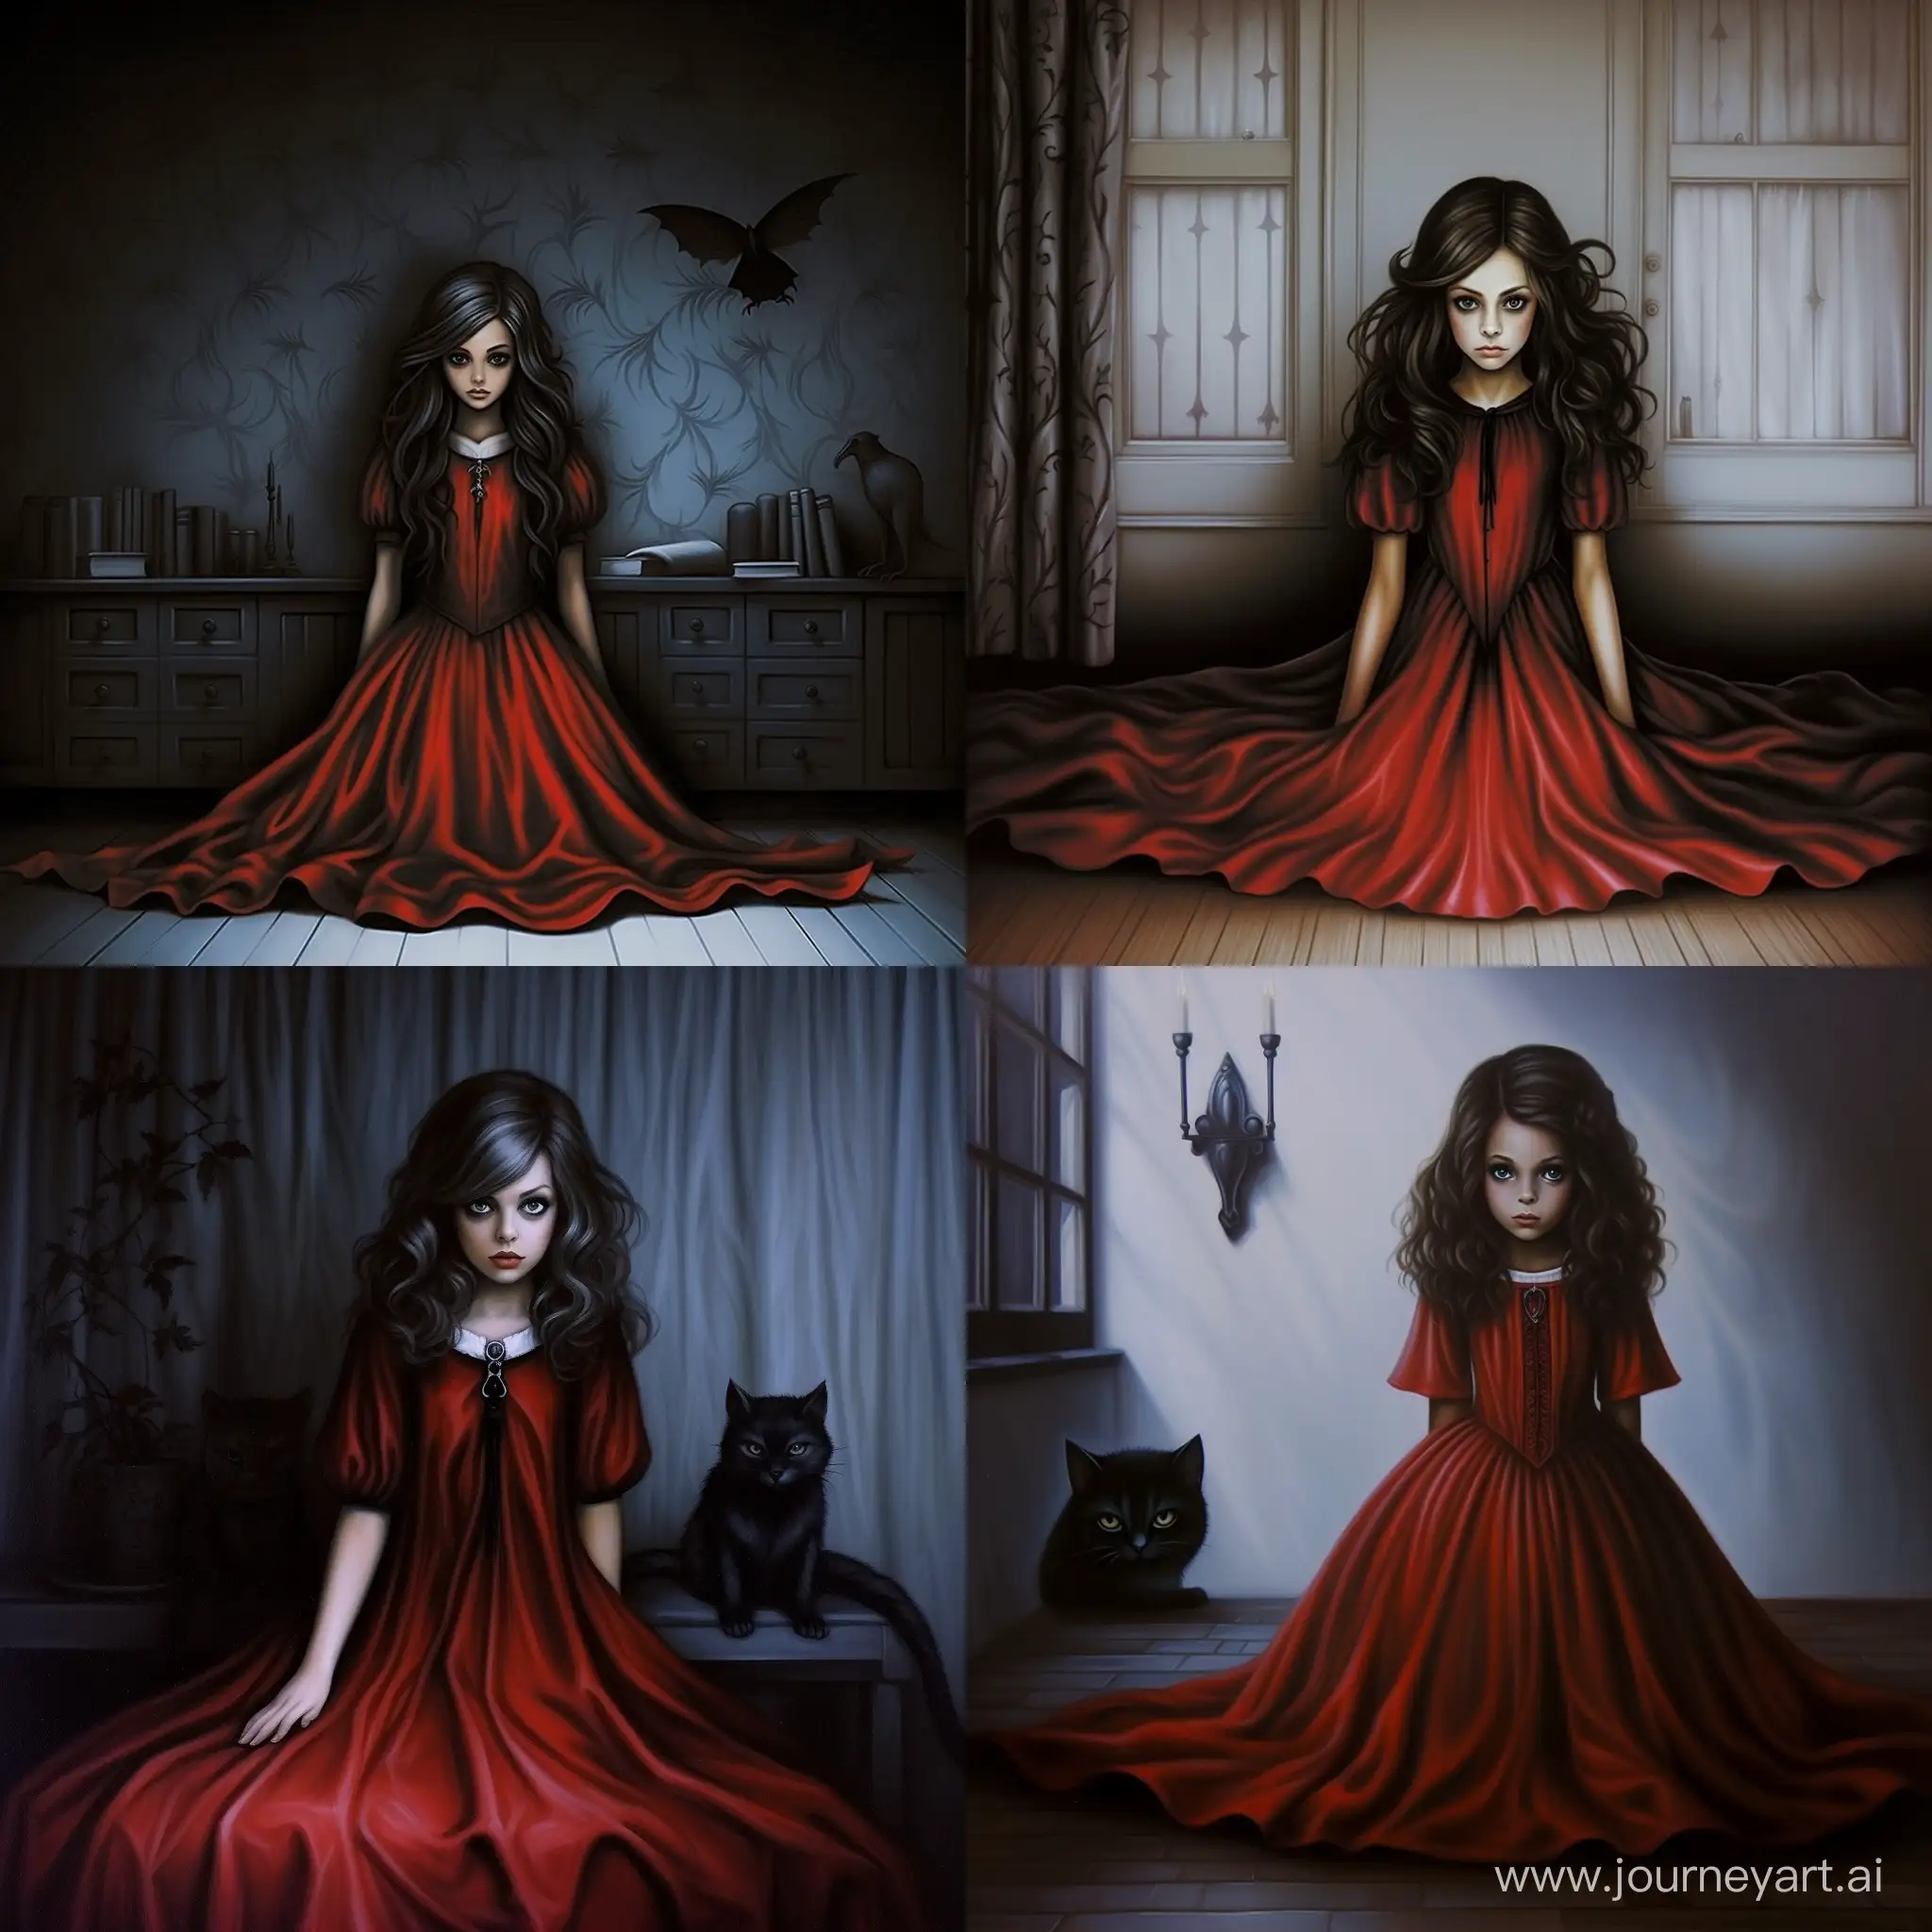 RedHaired-Girl-in-Gothic-Black-Dress-Sleeping-Beside-Gothic-Cat